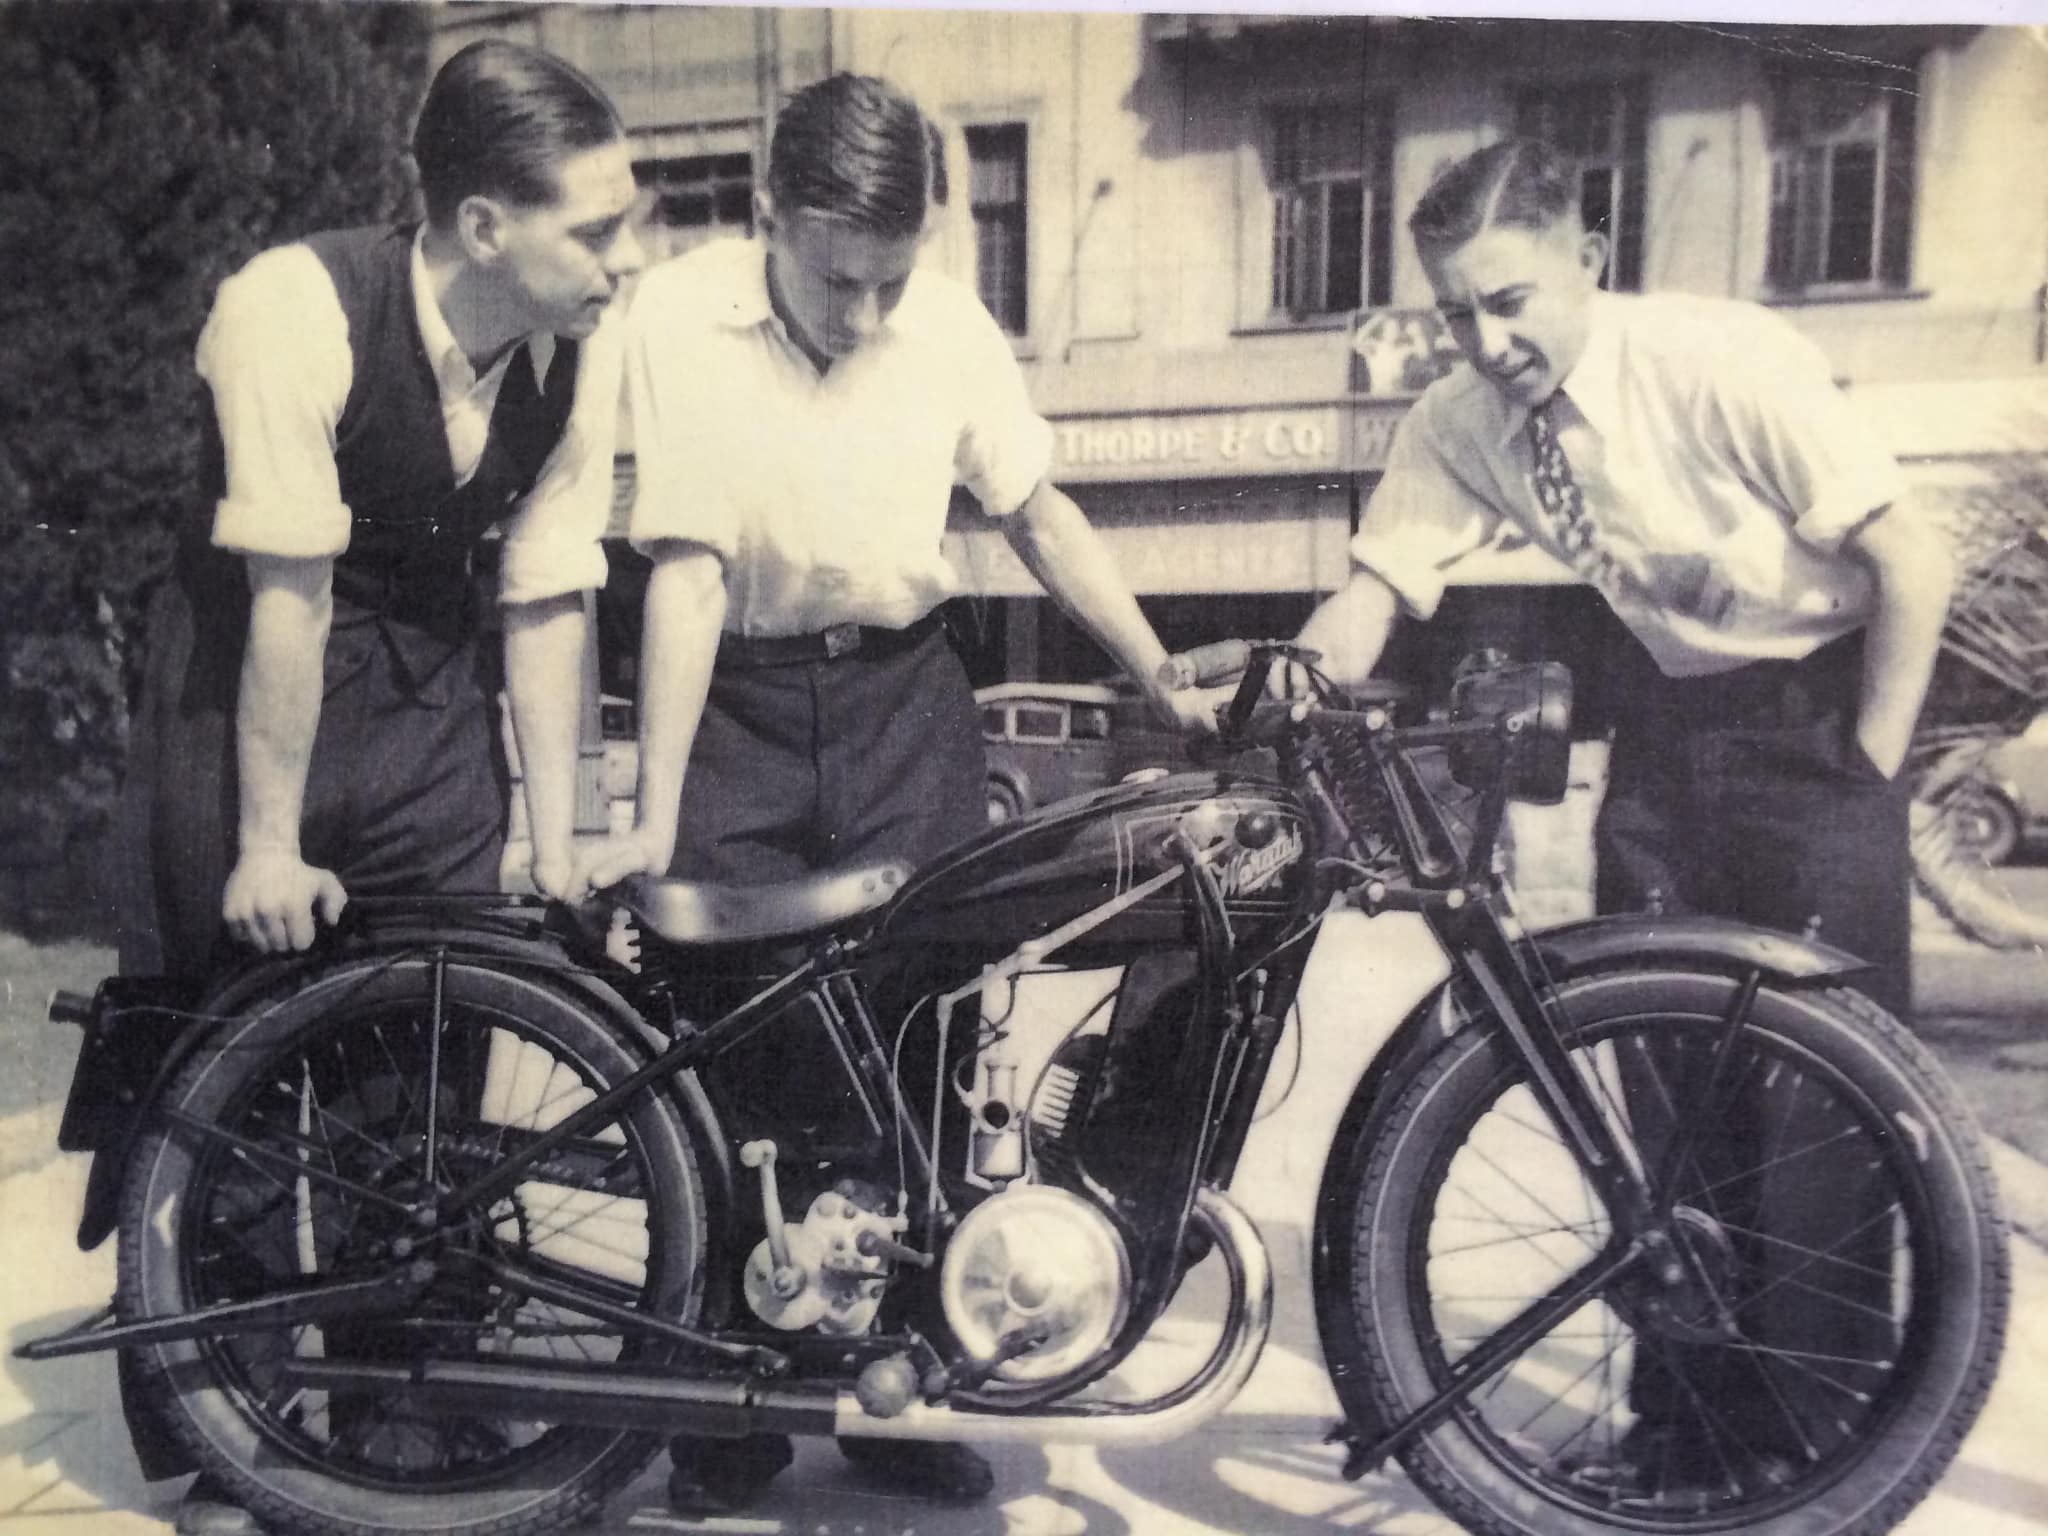 Waratah Motorcycles employees and a new bike in Sydney, circa 1945. Photograph: Waratah Motorcycles